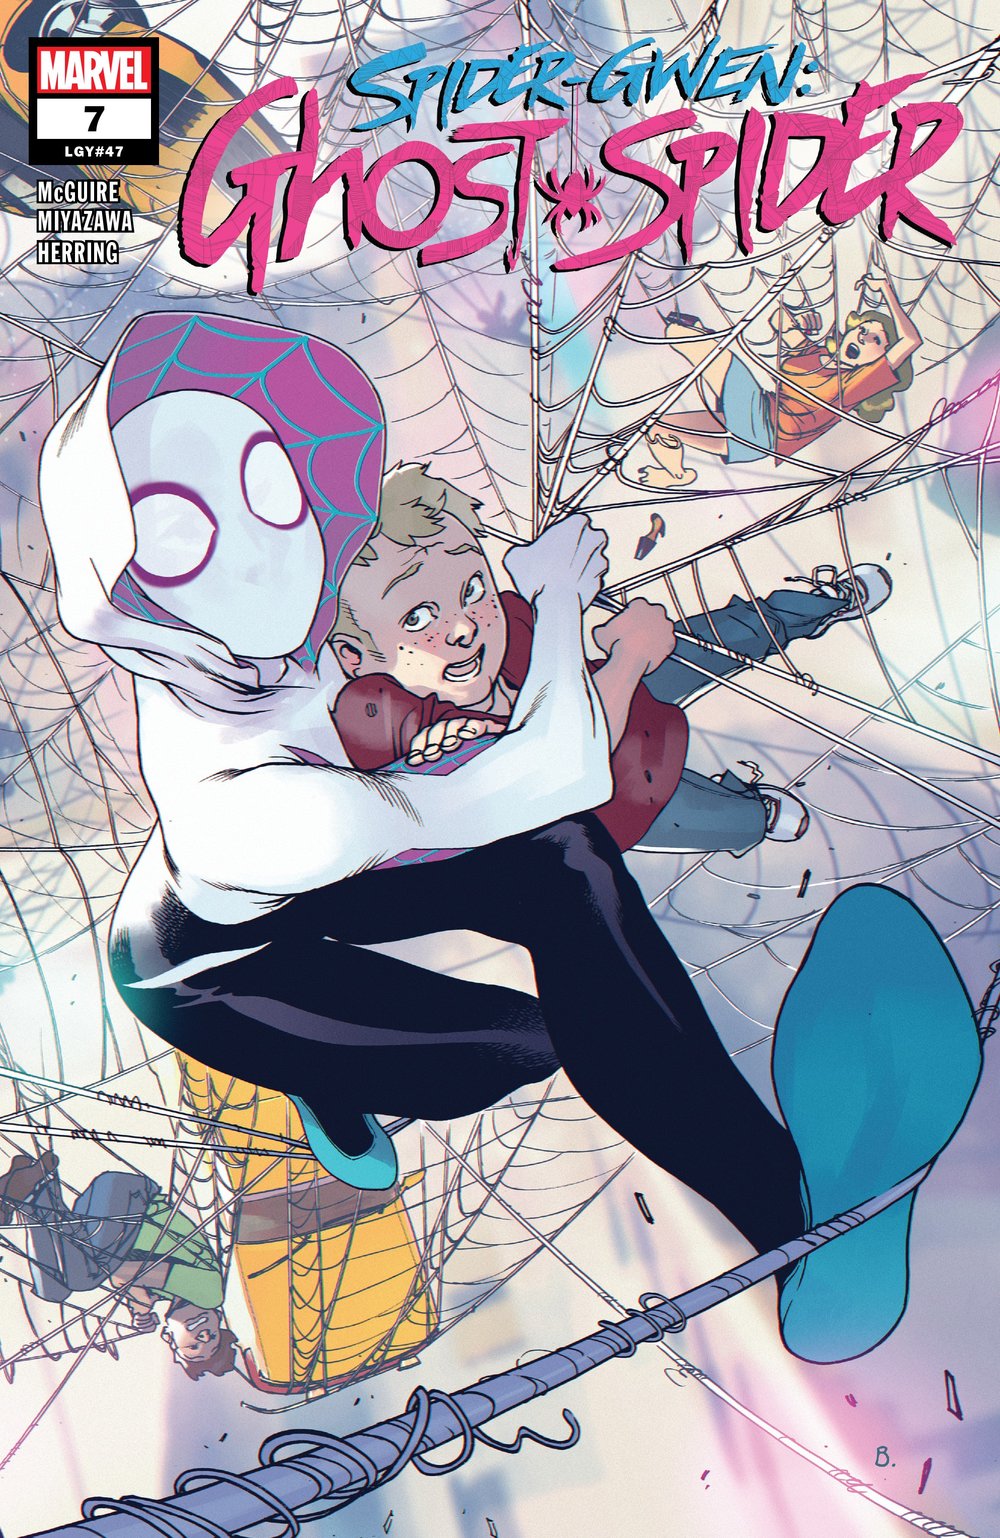 Ghost-Spider #5 Review – Weird Science Marvel Comics